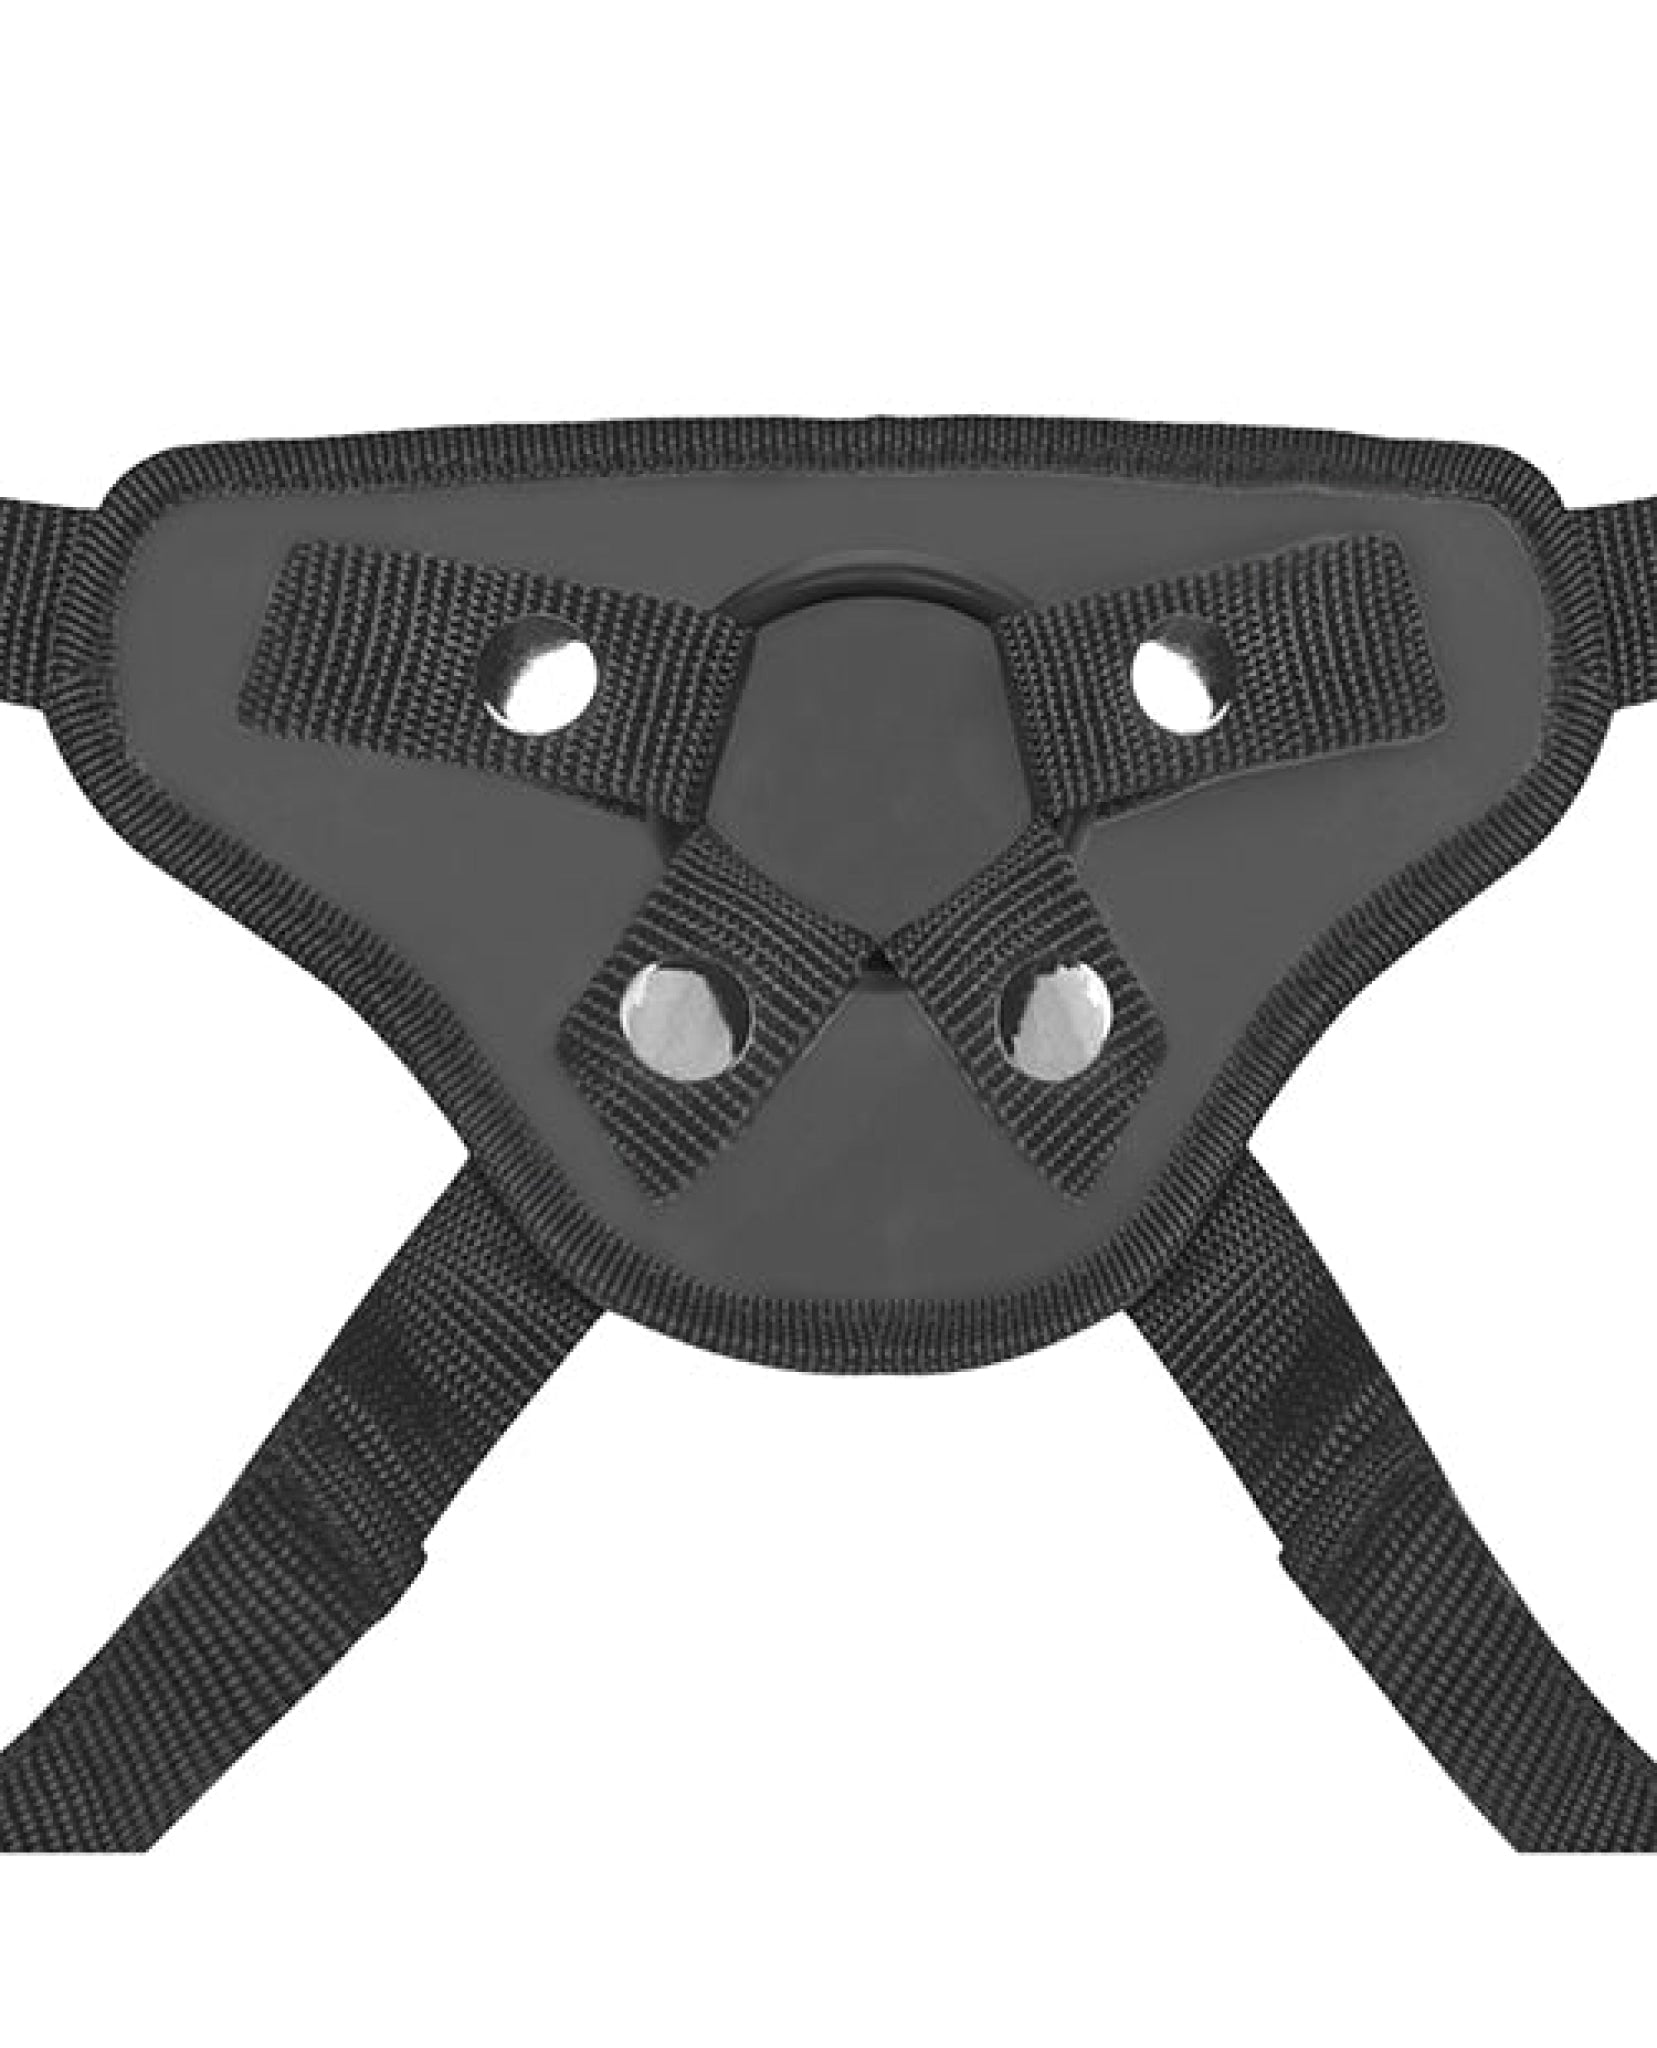 Lux Fetish Beginners Strap On Harness - Black Lux Fetish